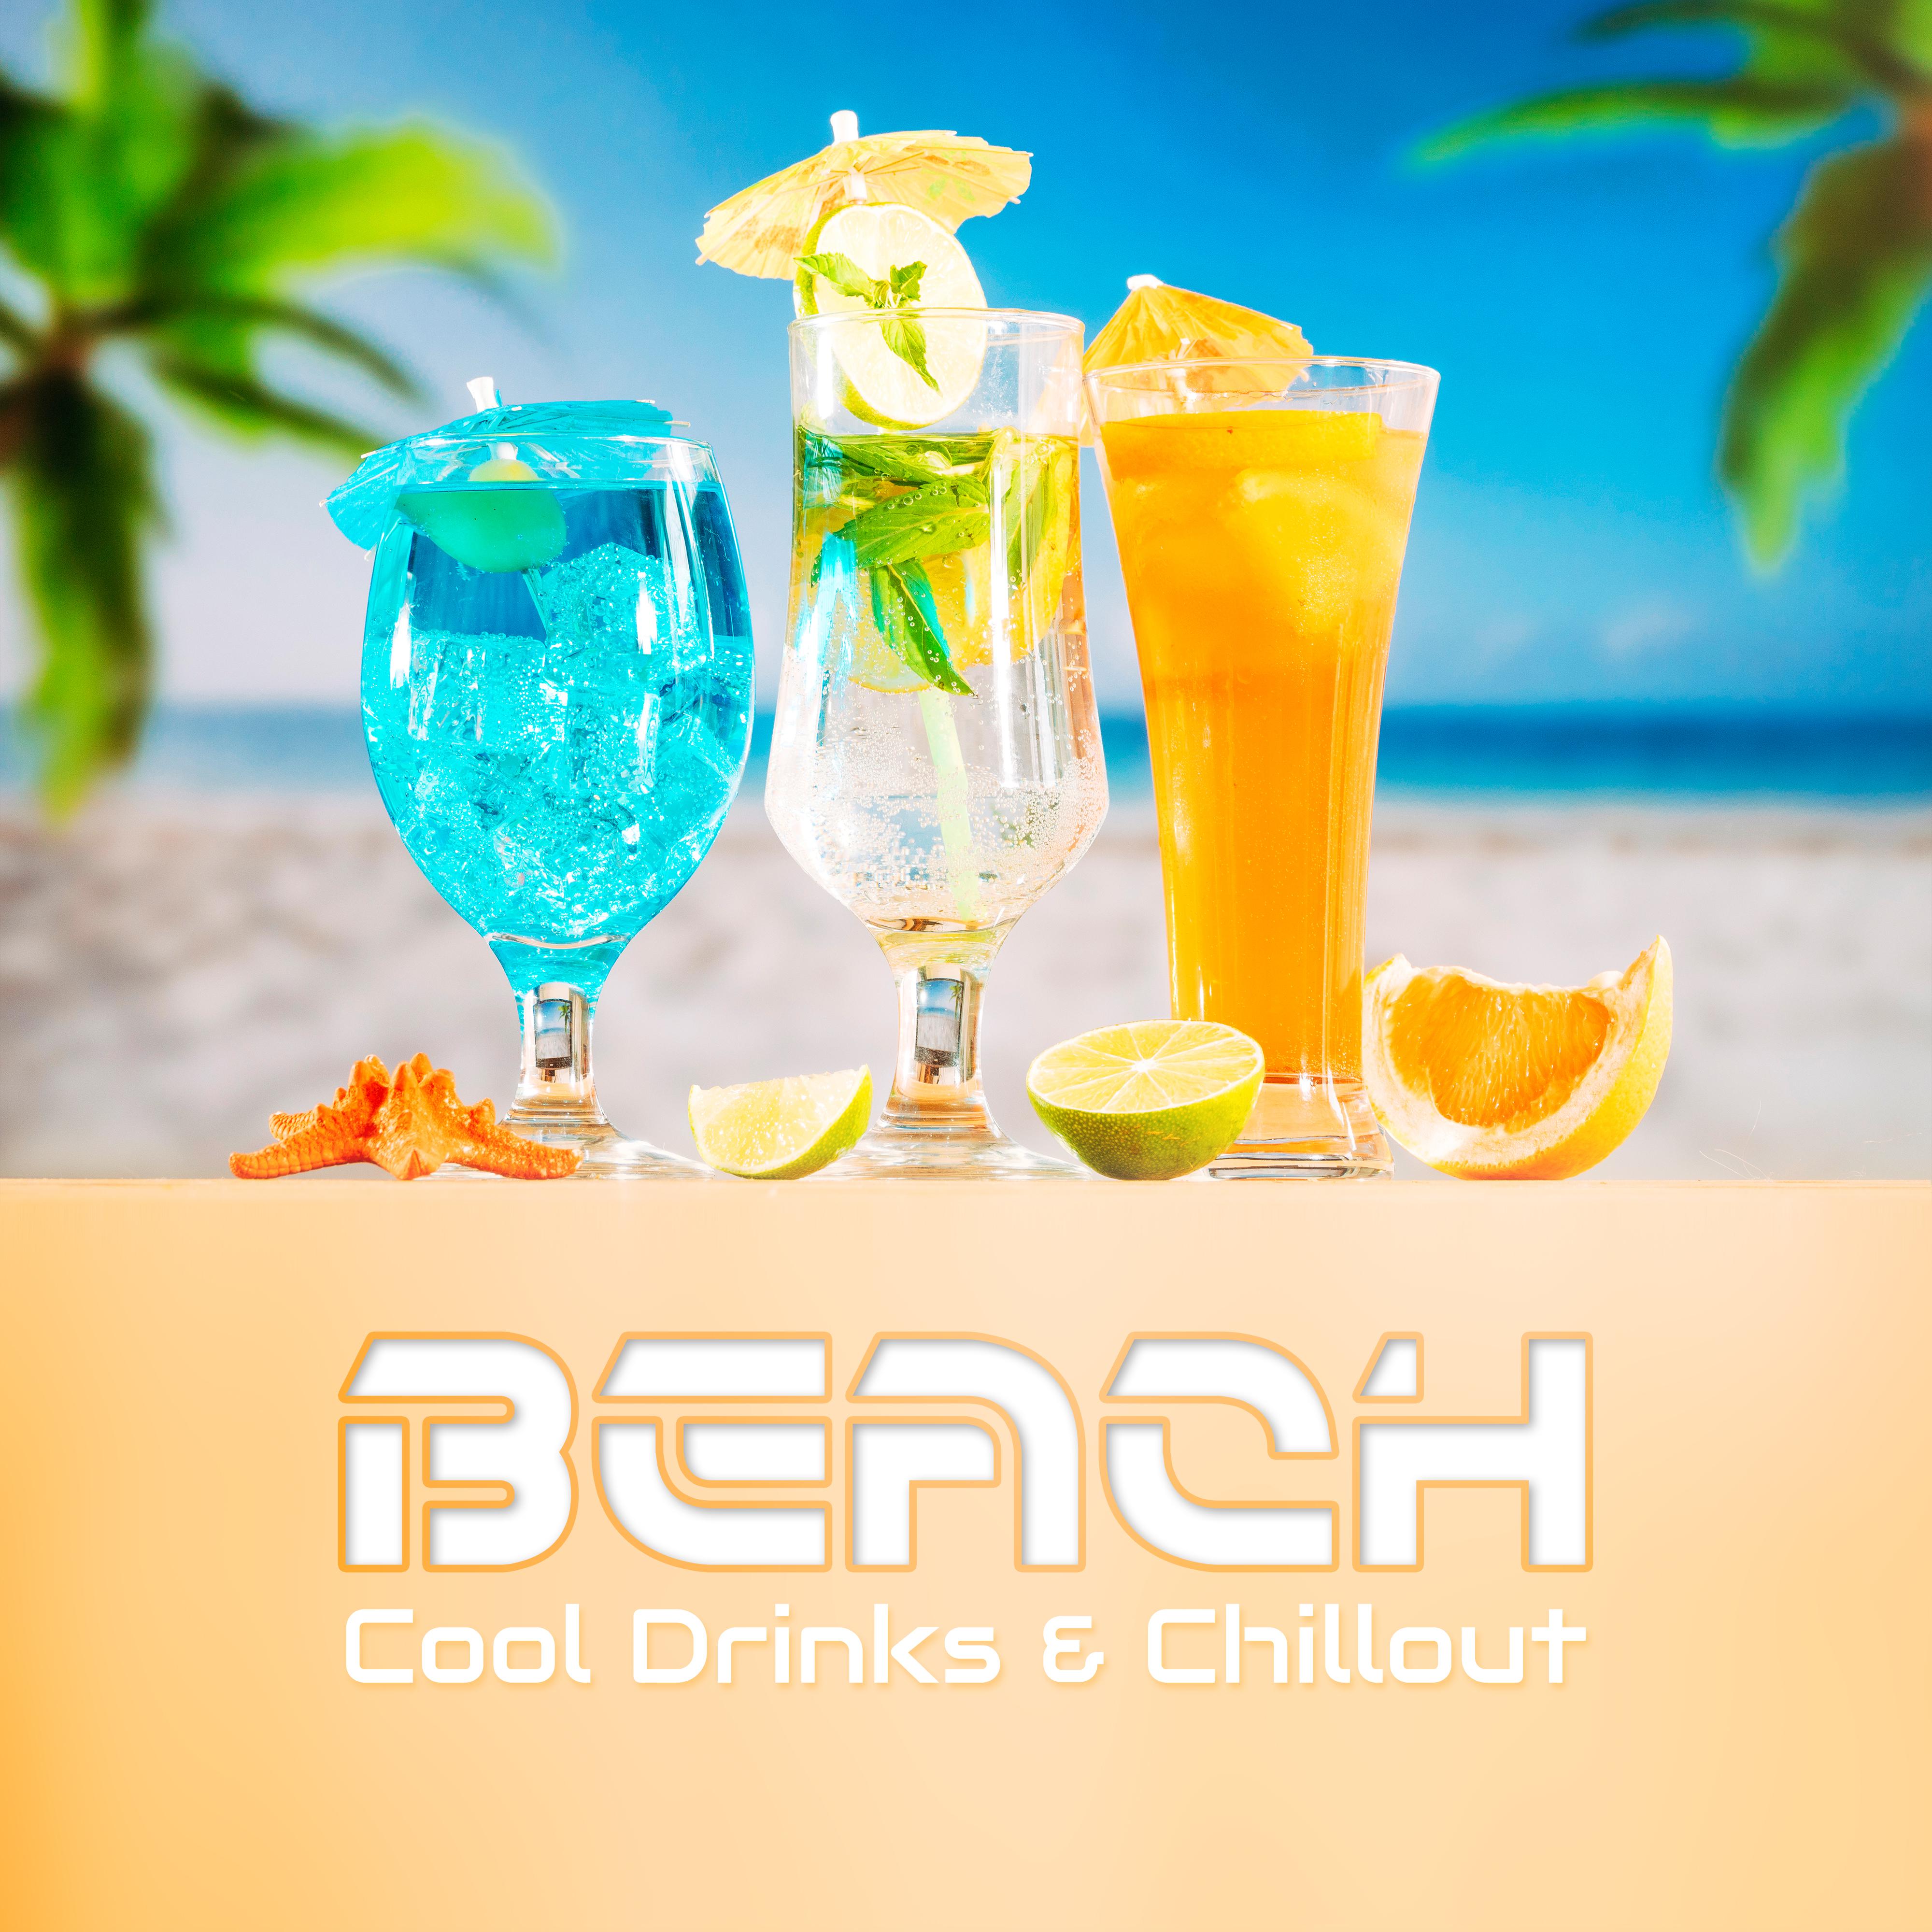 Beach, Cool Drinks  Chillout  Most Relaxing Holiday Chill Out 2019 Music Mix, Summer Time Celebration, Calm Down  Rest, Tropical Vacation Anthems